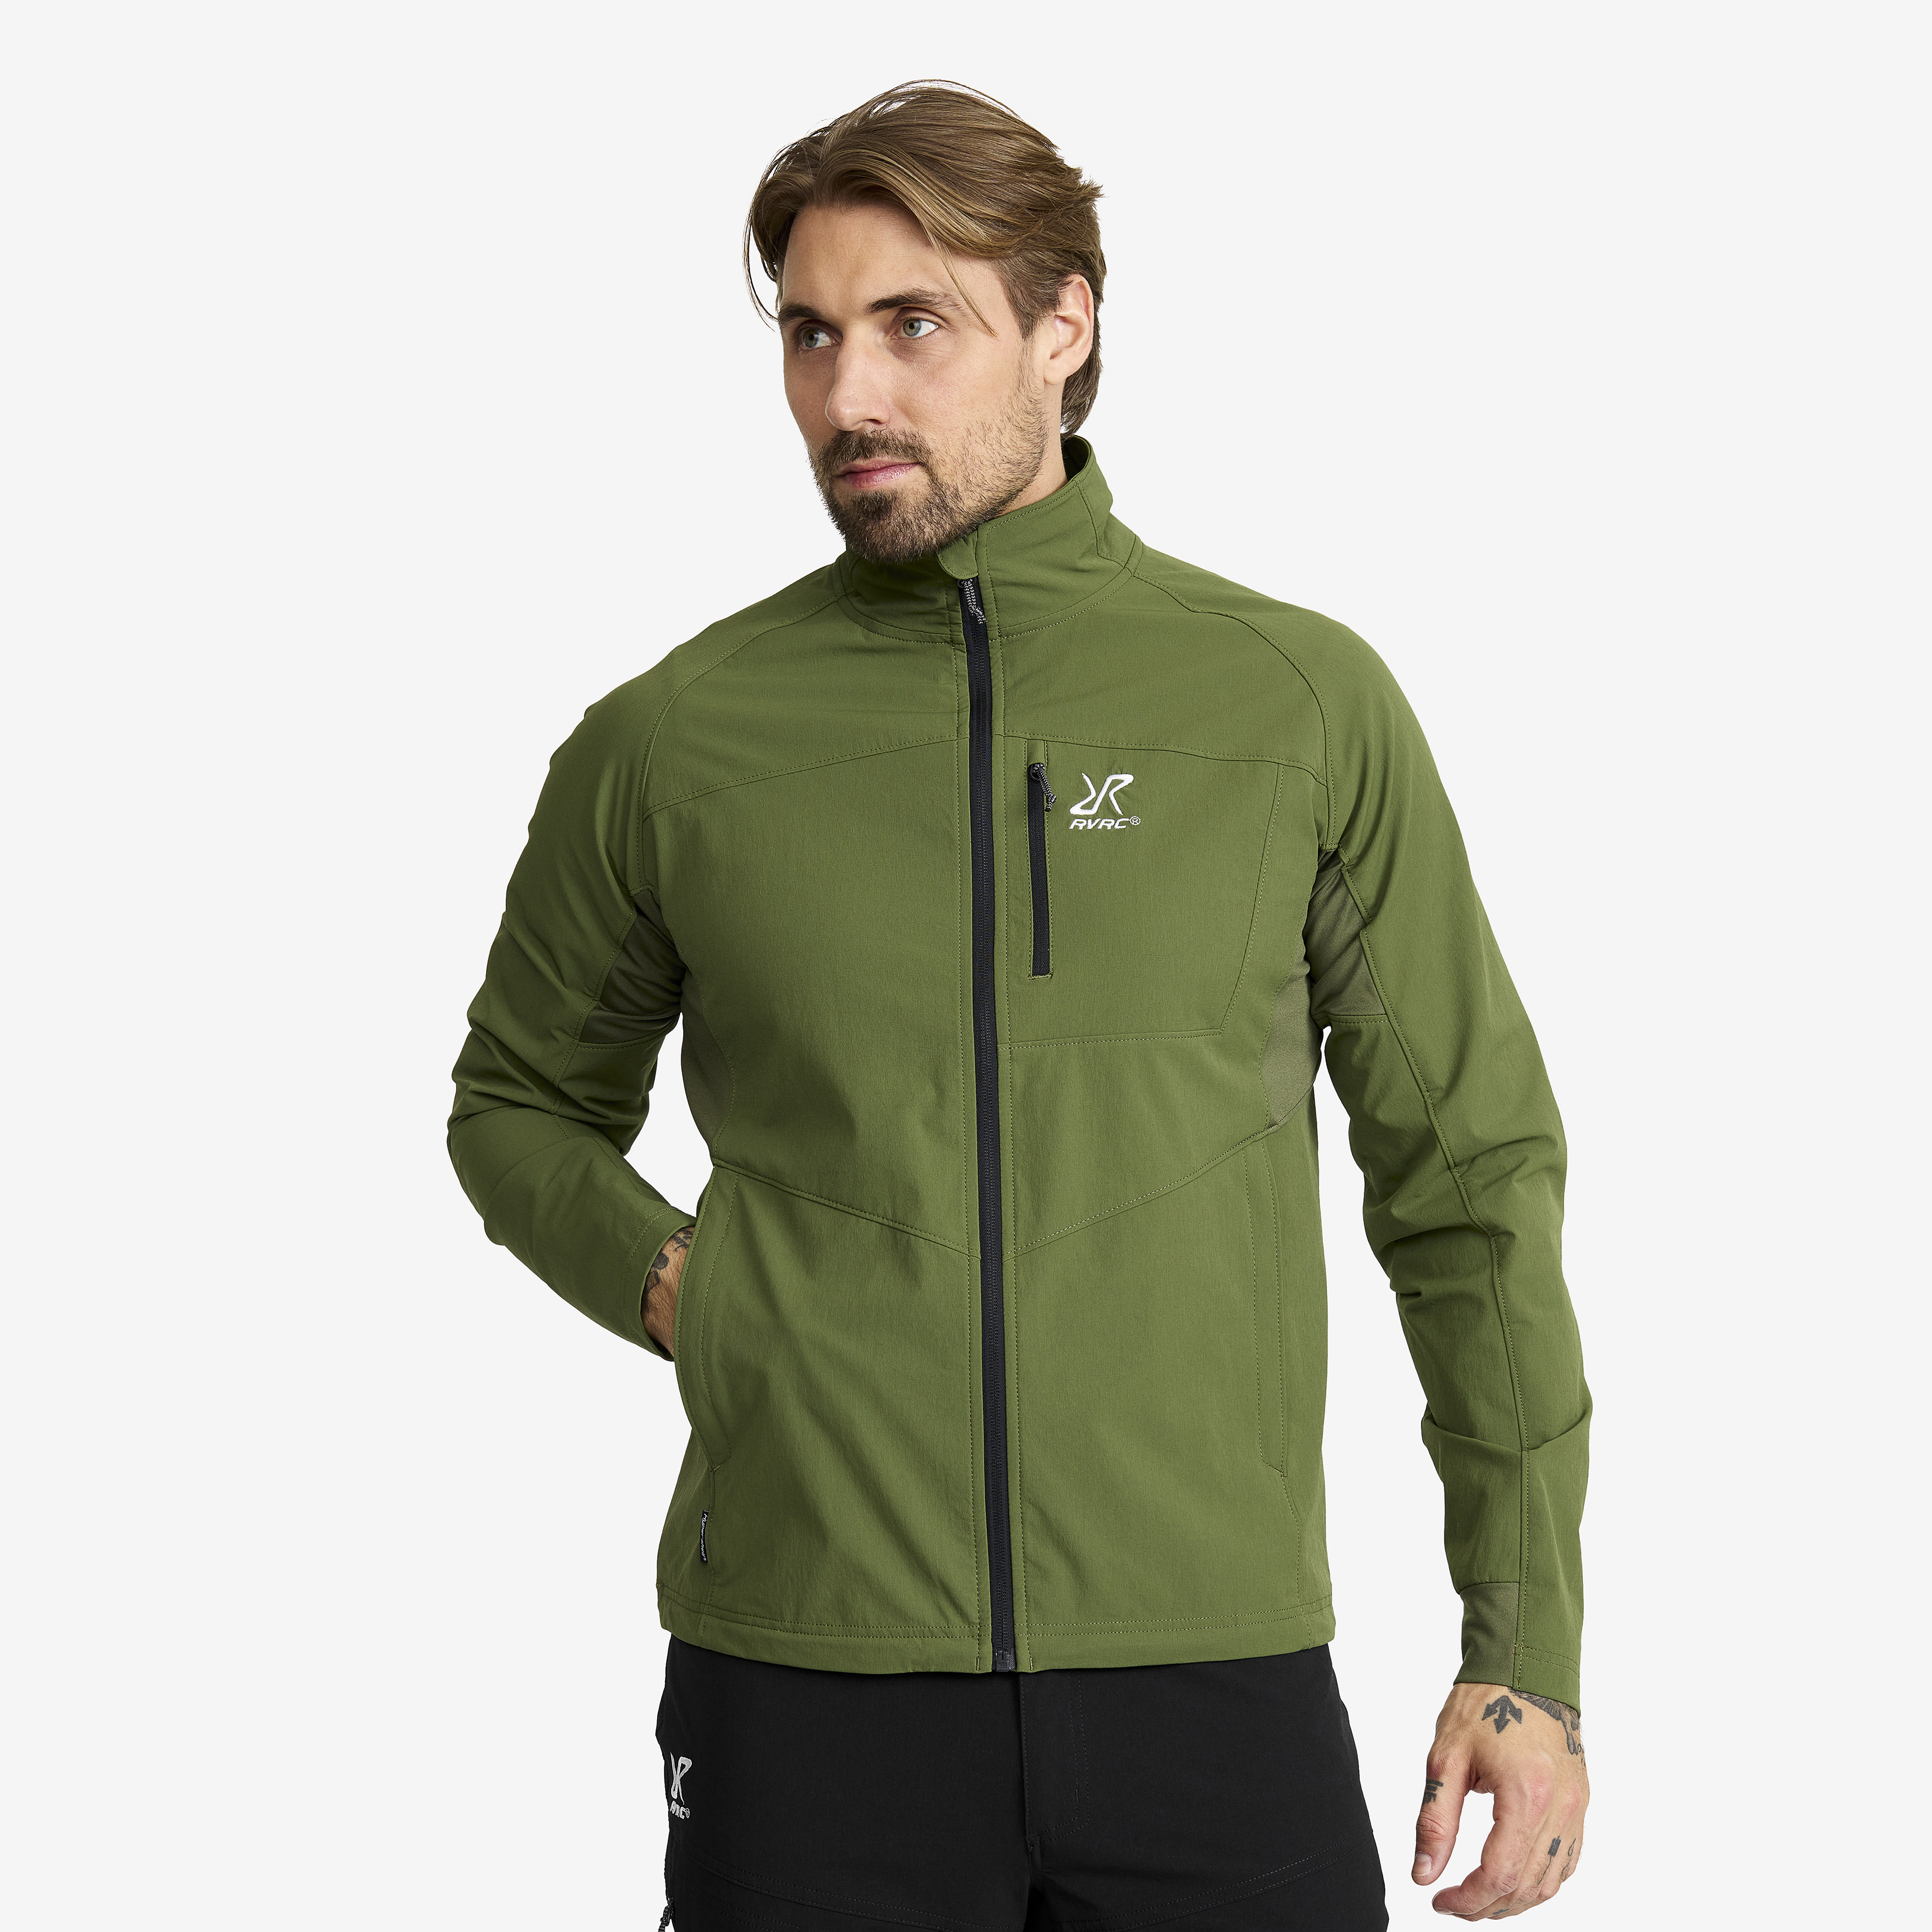 Venue Softstretch Jacket Cypress Homme